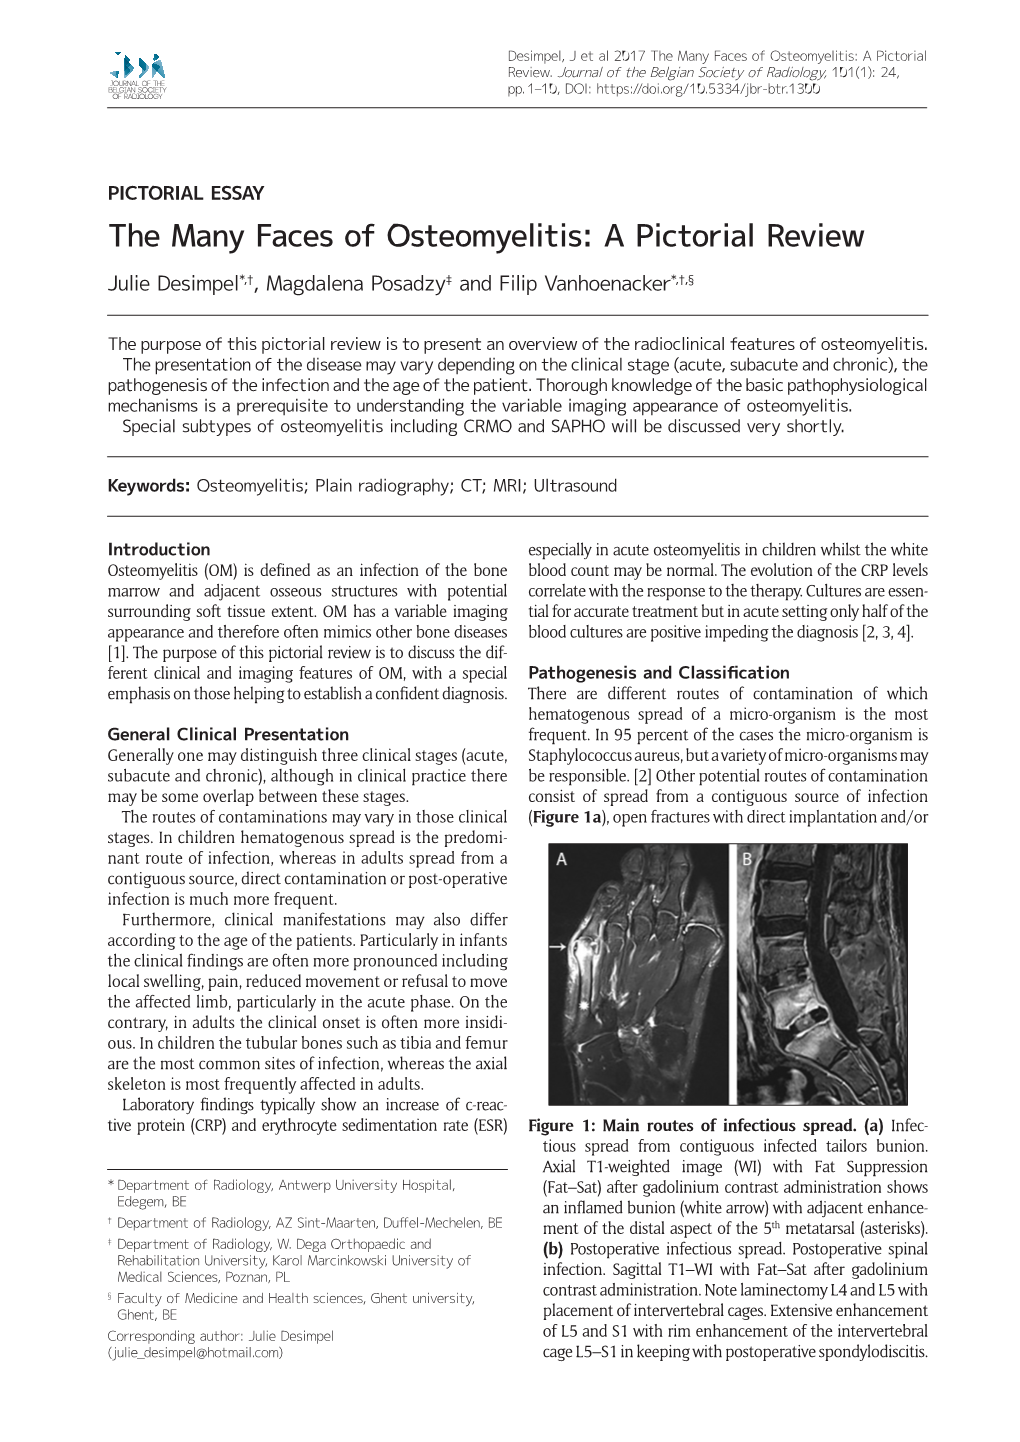 The Many Faces of Osteomyelitis: a Pictorial Review